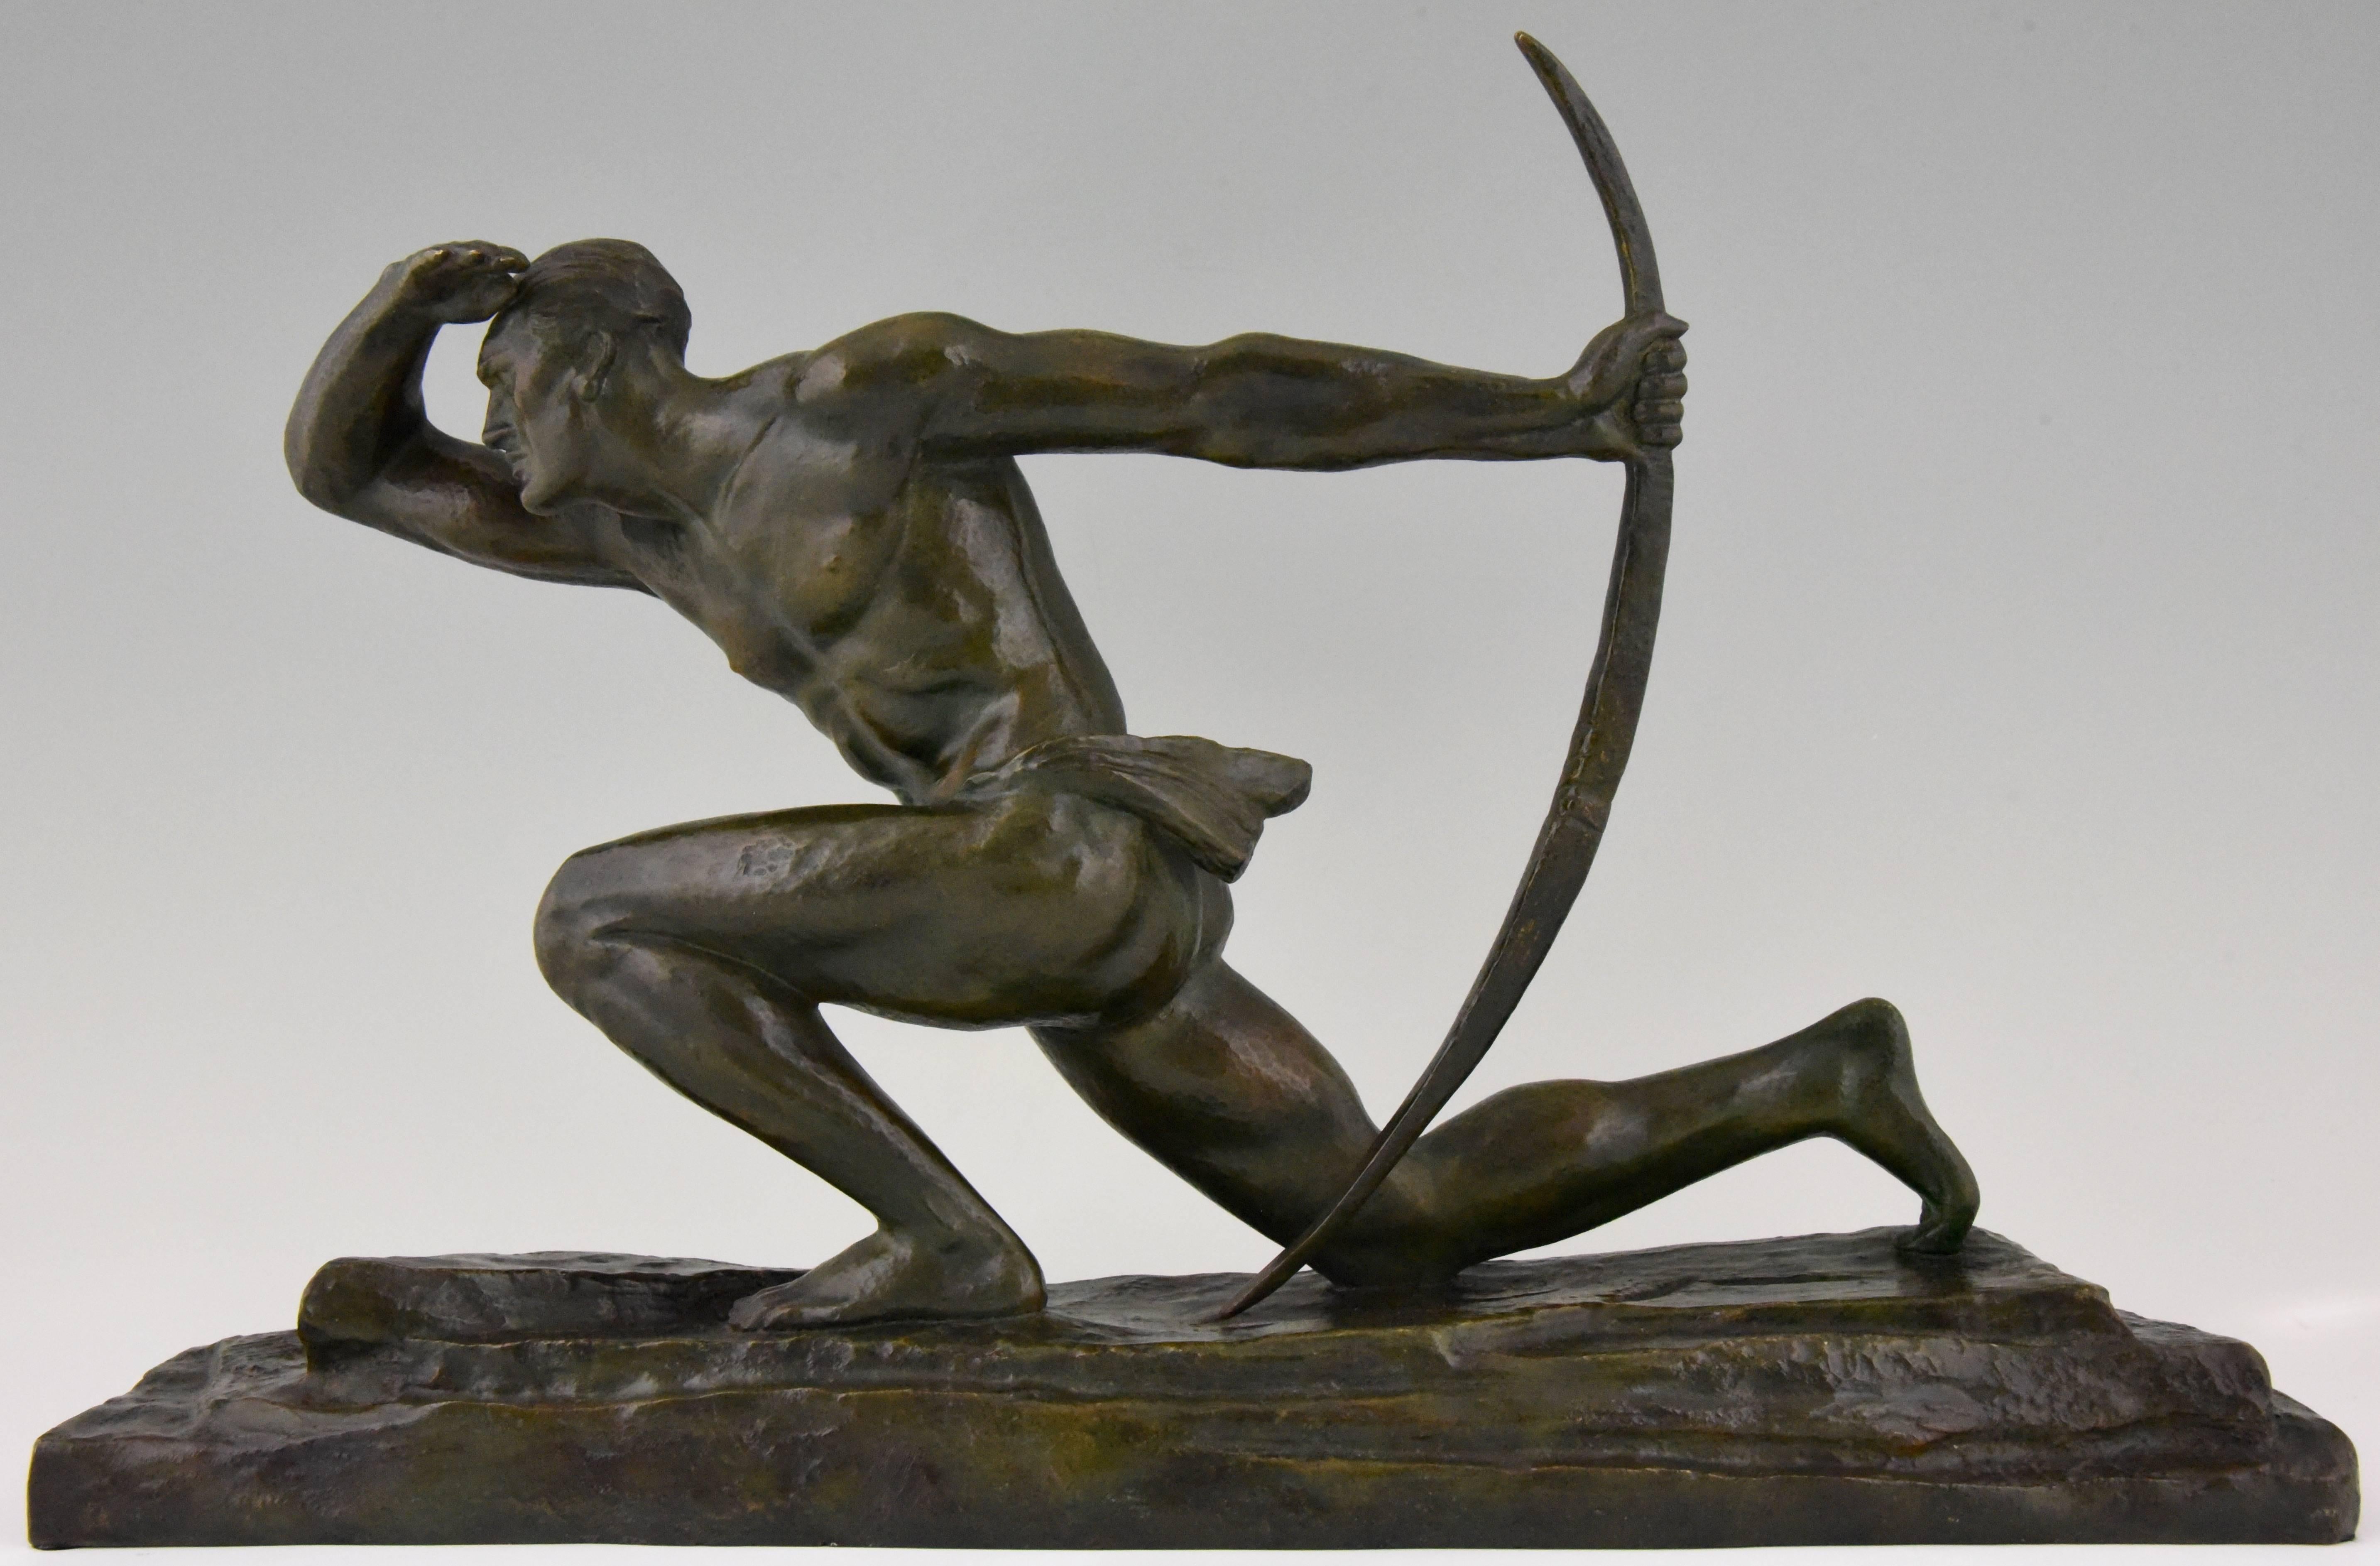 The Archer, a bronze sculpture of a kneeling man holding a bow by the French artist Pierre Le Faguays with a nice green patina.